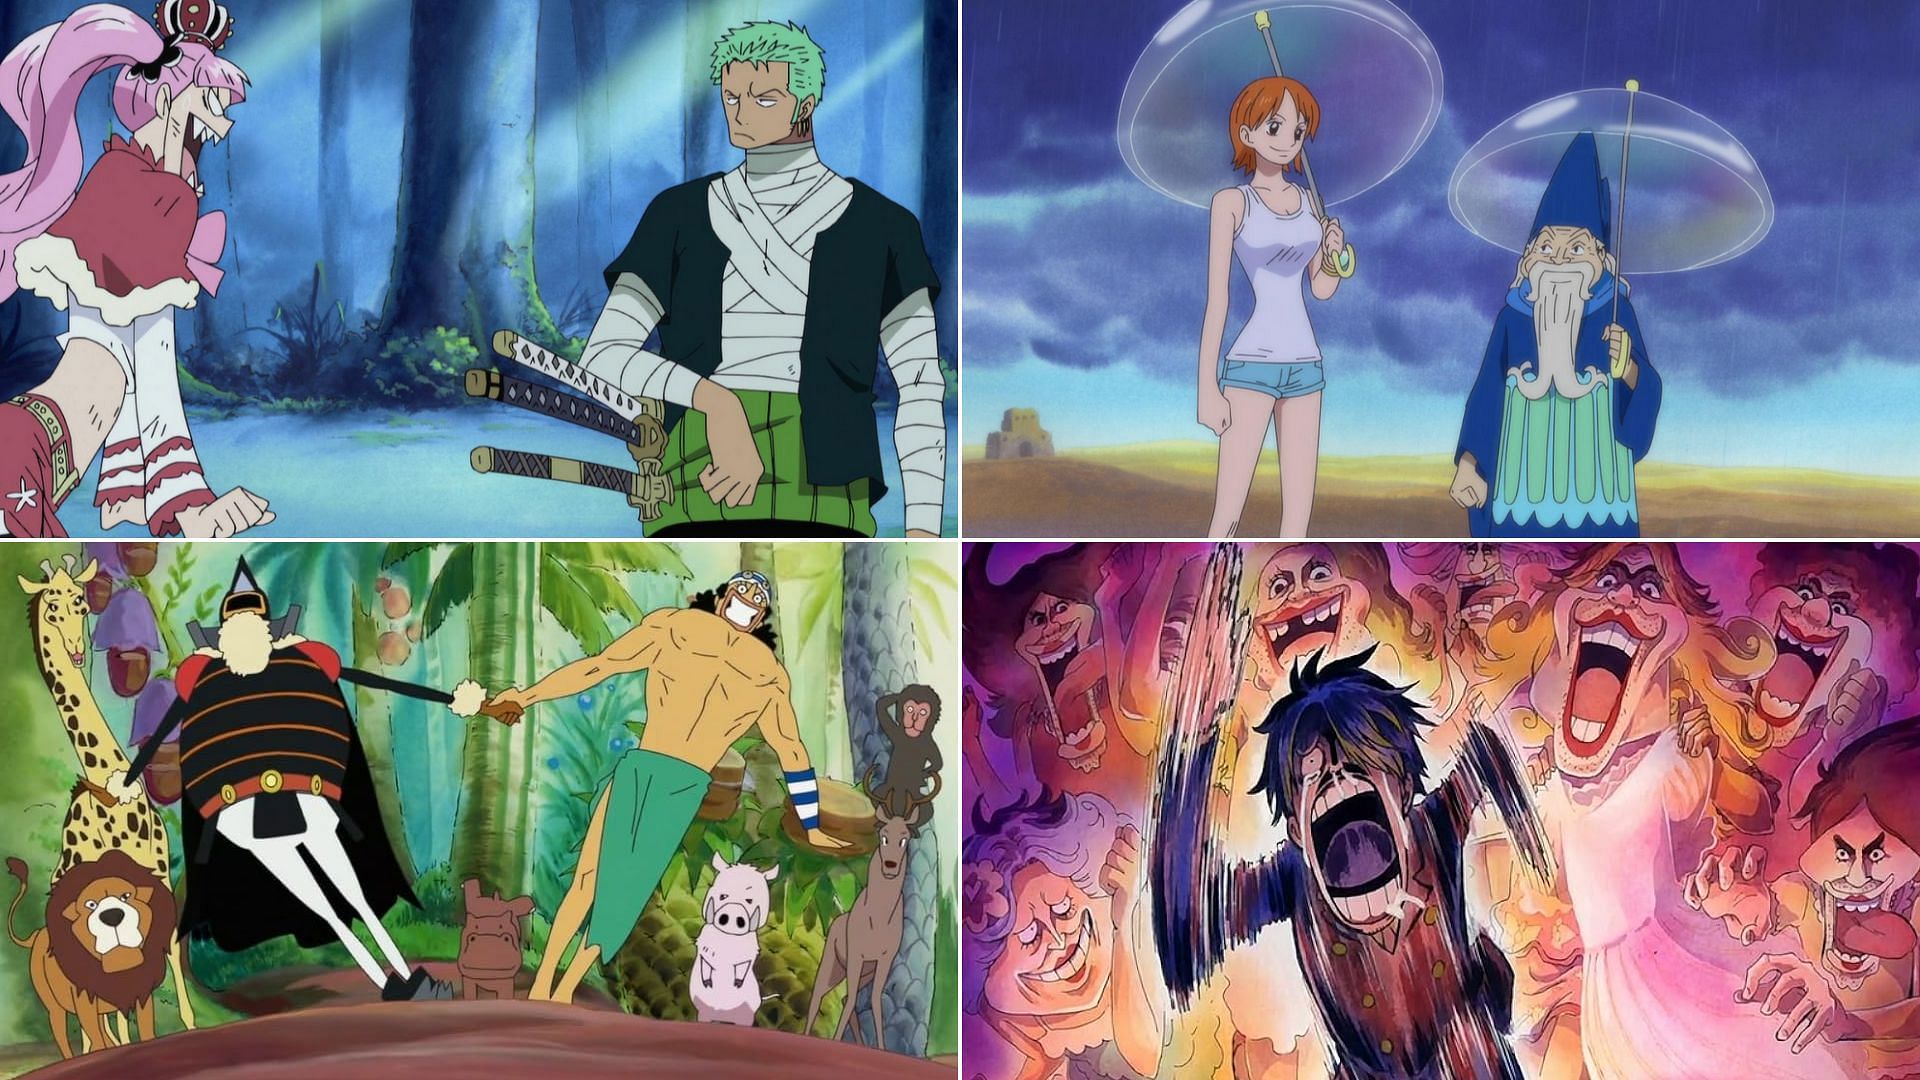 The Straw Hat crew&#039;s adventures as seen in the One Piece anime (Image via Toei Animation)